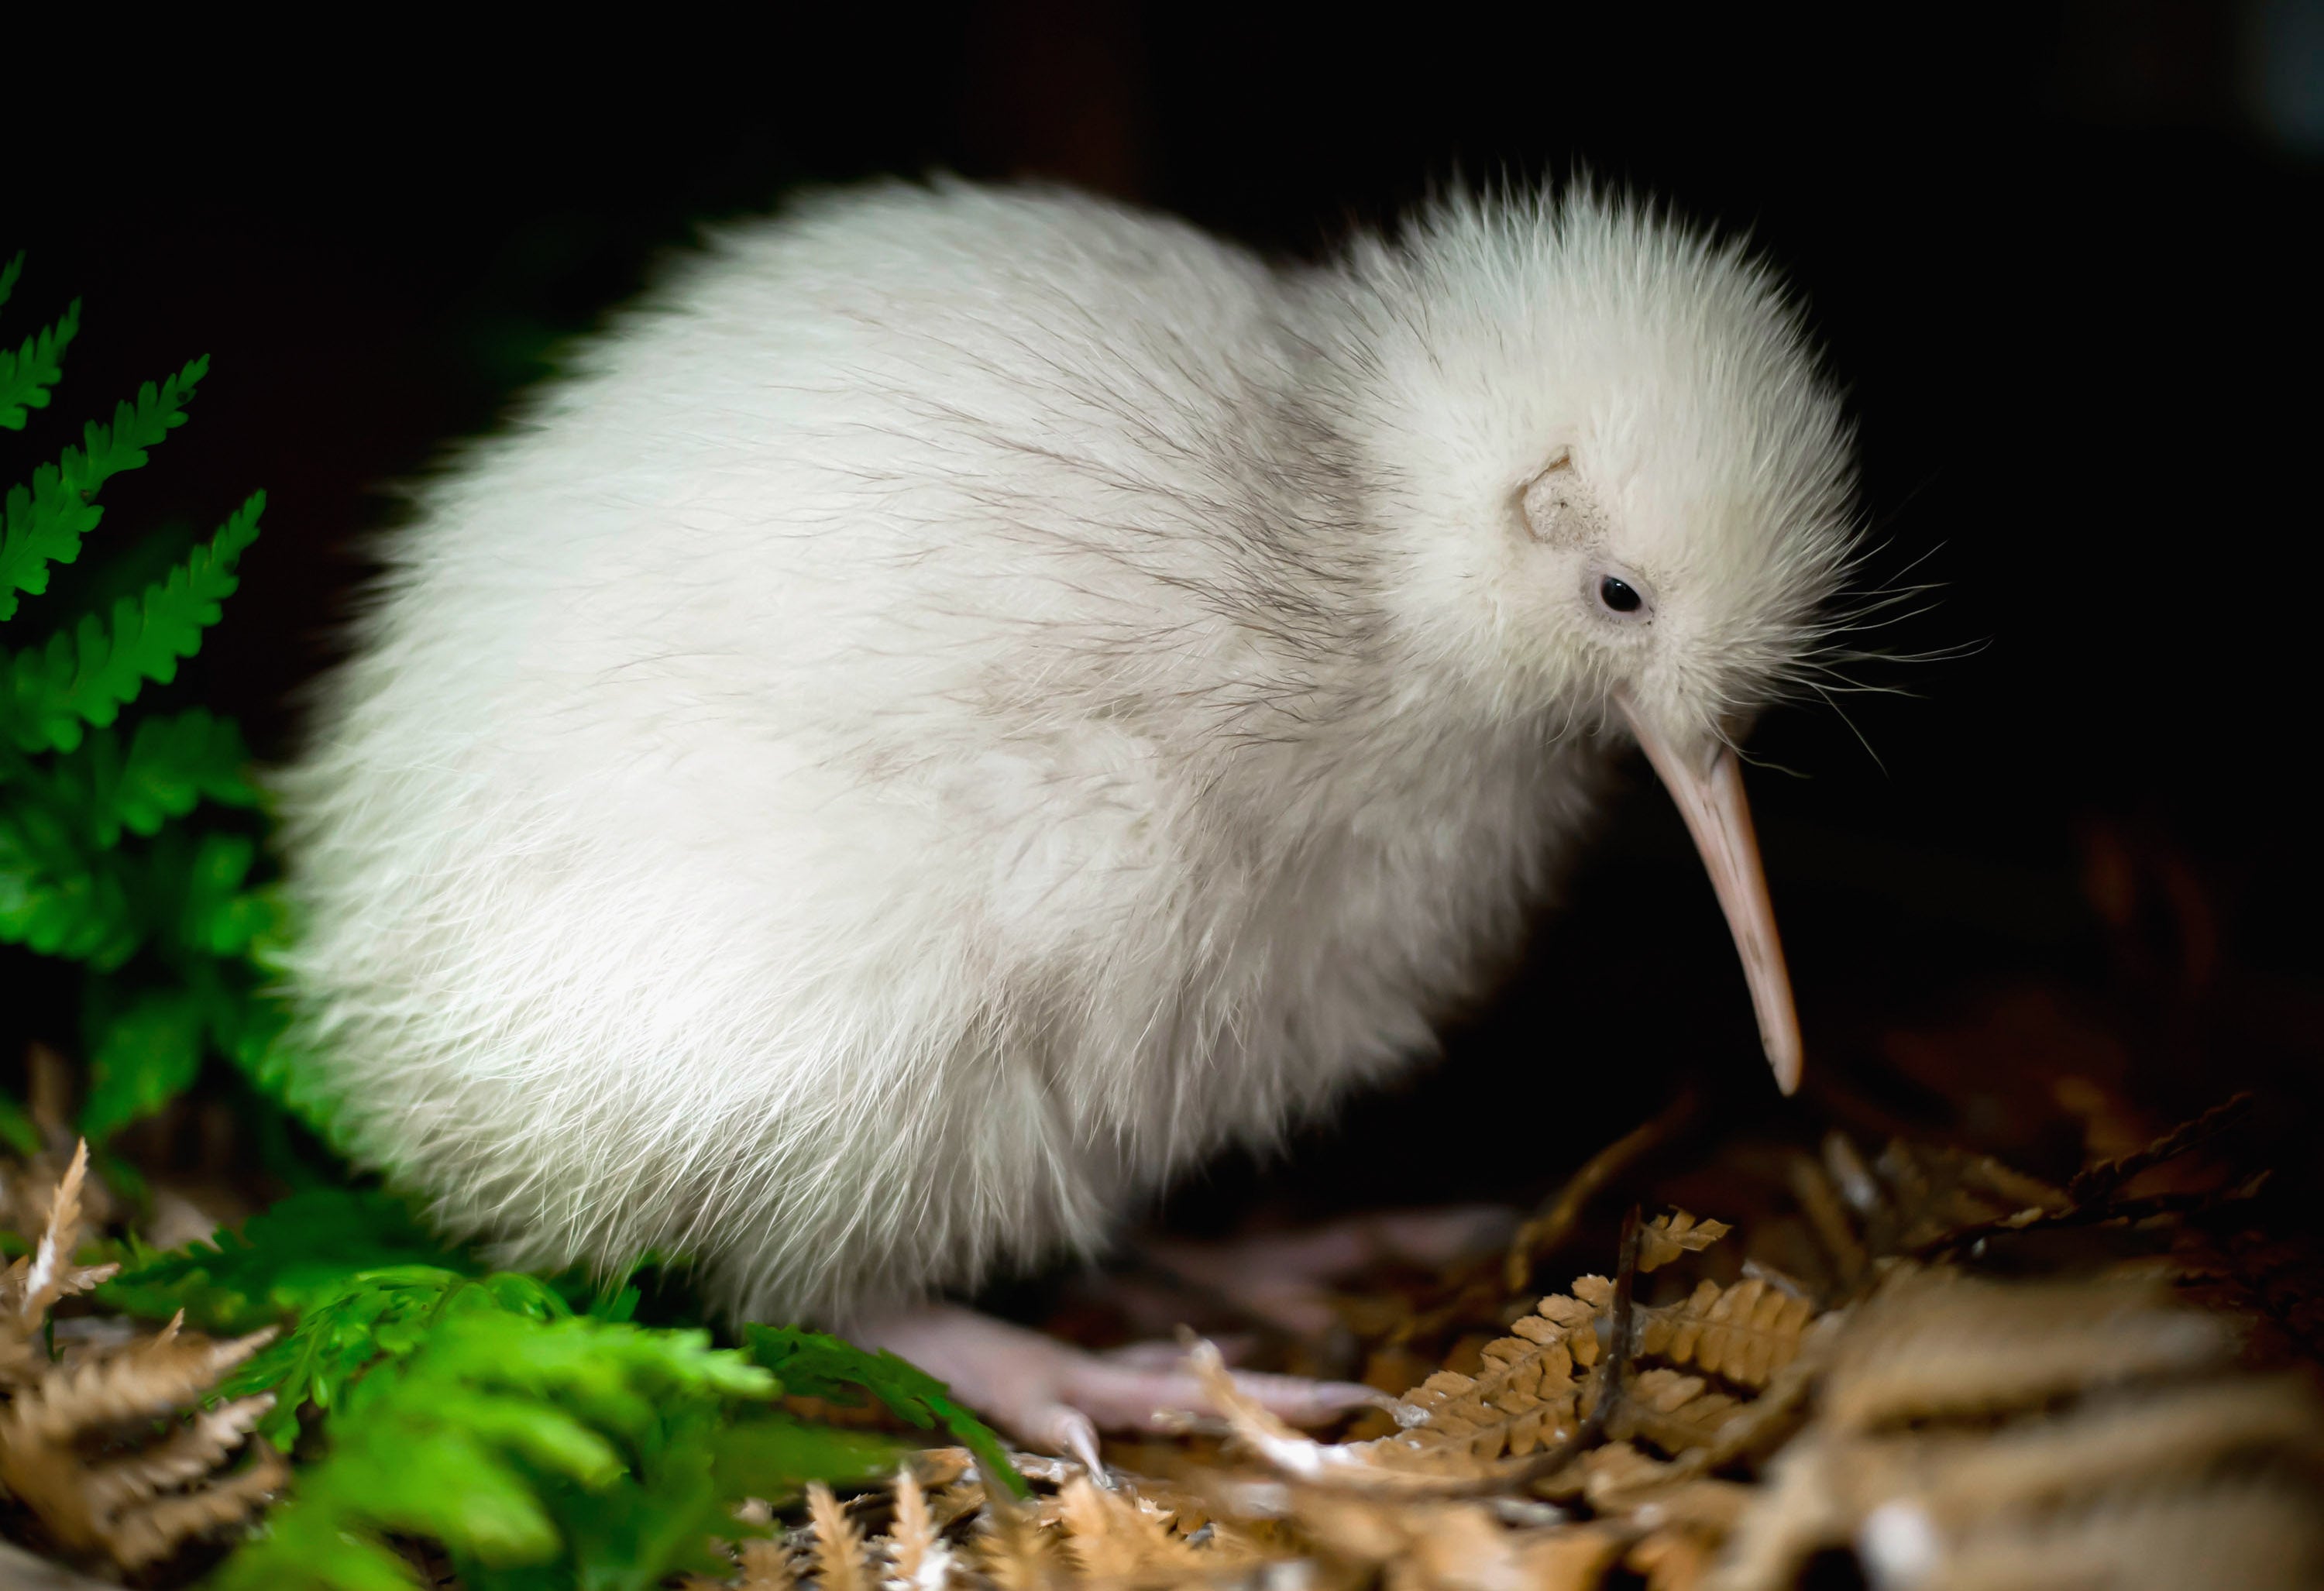 The all-white kiwi, named ‘Manukura’ is suspected to be the first white chick born in captivity